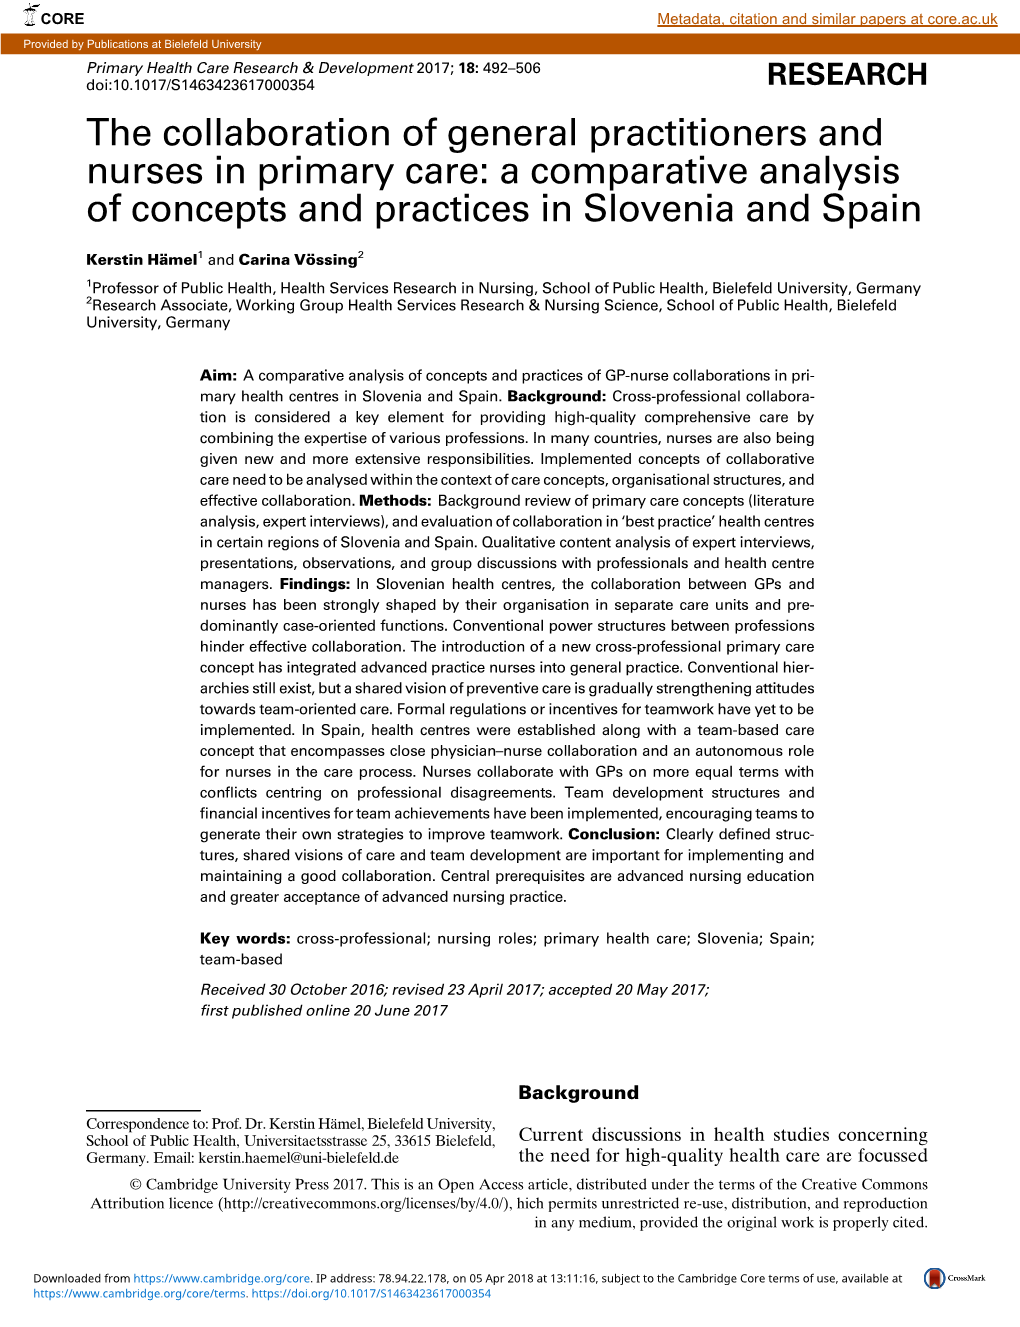 The Collaboration of General Practitioners and Nurses in Primary Care: a Comparative Analysis of Concepts and Practices in Slovenia and Spain